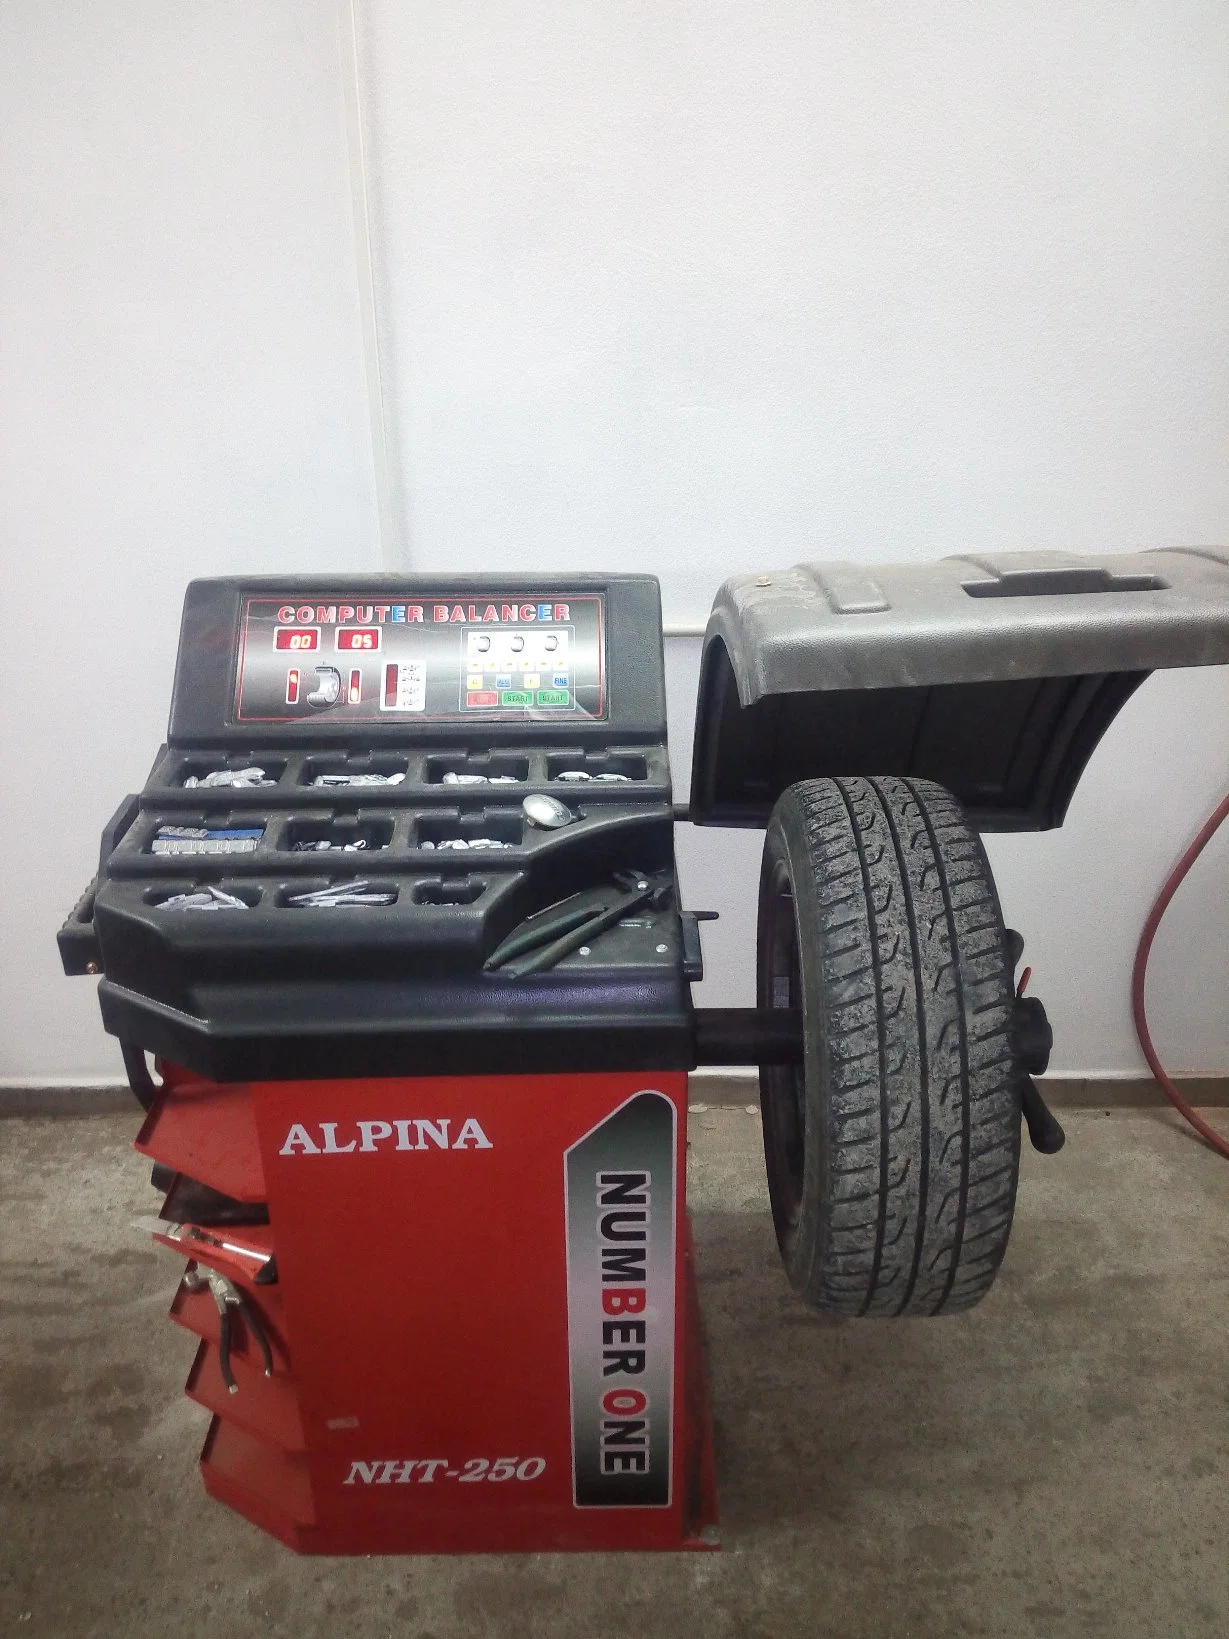 Car Tire Changer 13-21 Inches Alpina Products